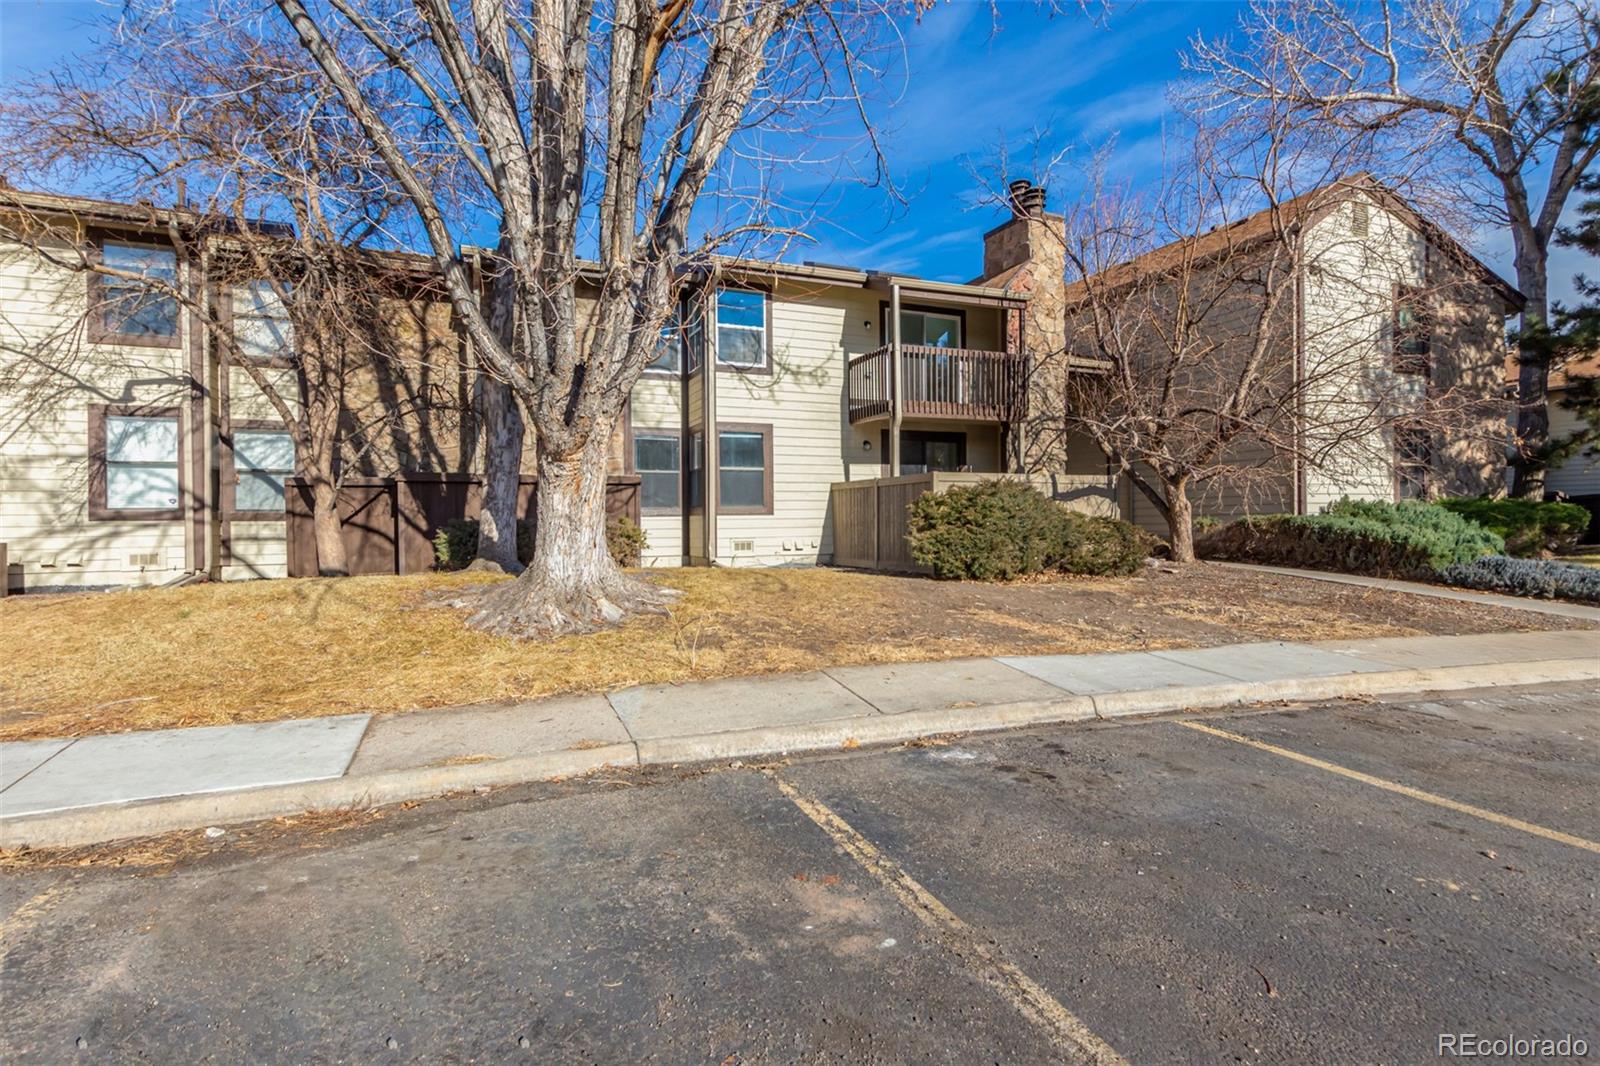 7720 w 87th drive, arvada sold home. Closed on 2024-04-18 for $335,000.